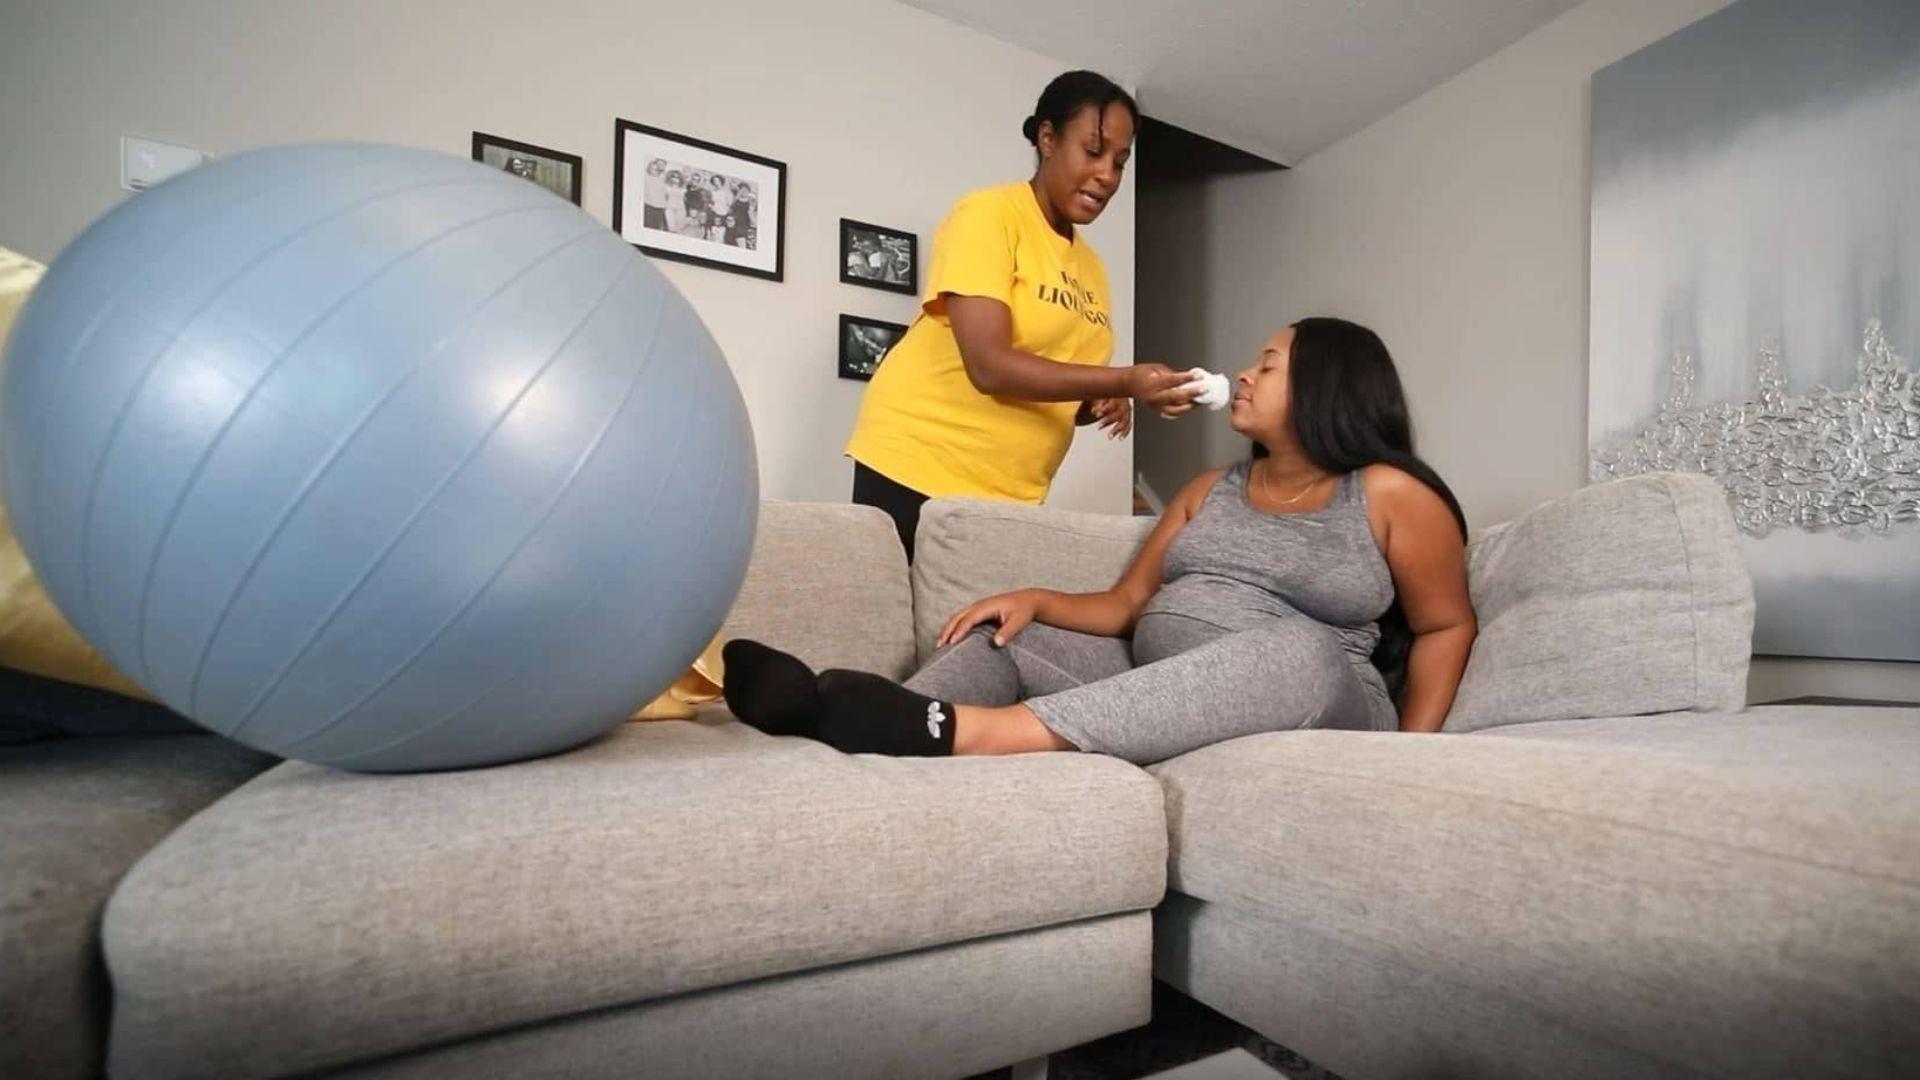 A Black woman on the couch pregnant with a medicine ball next to her. Another black woman helps her with wiping her nose.